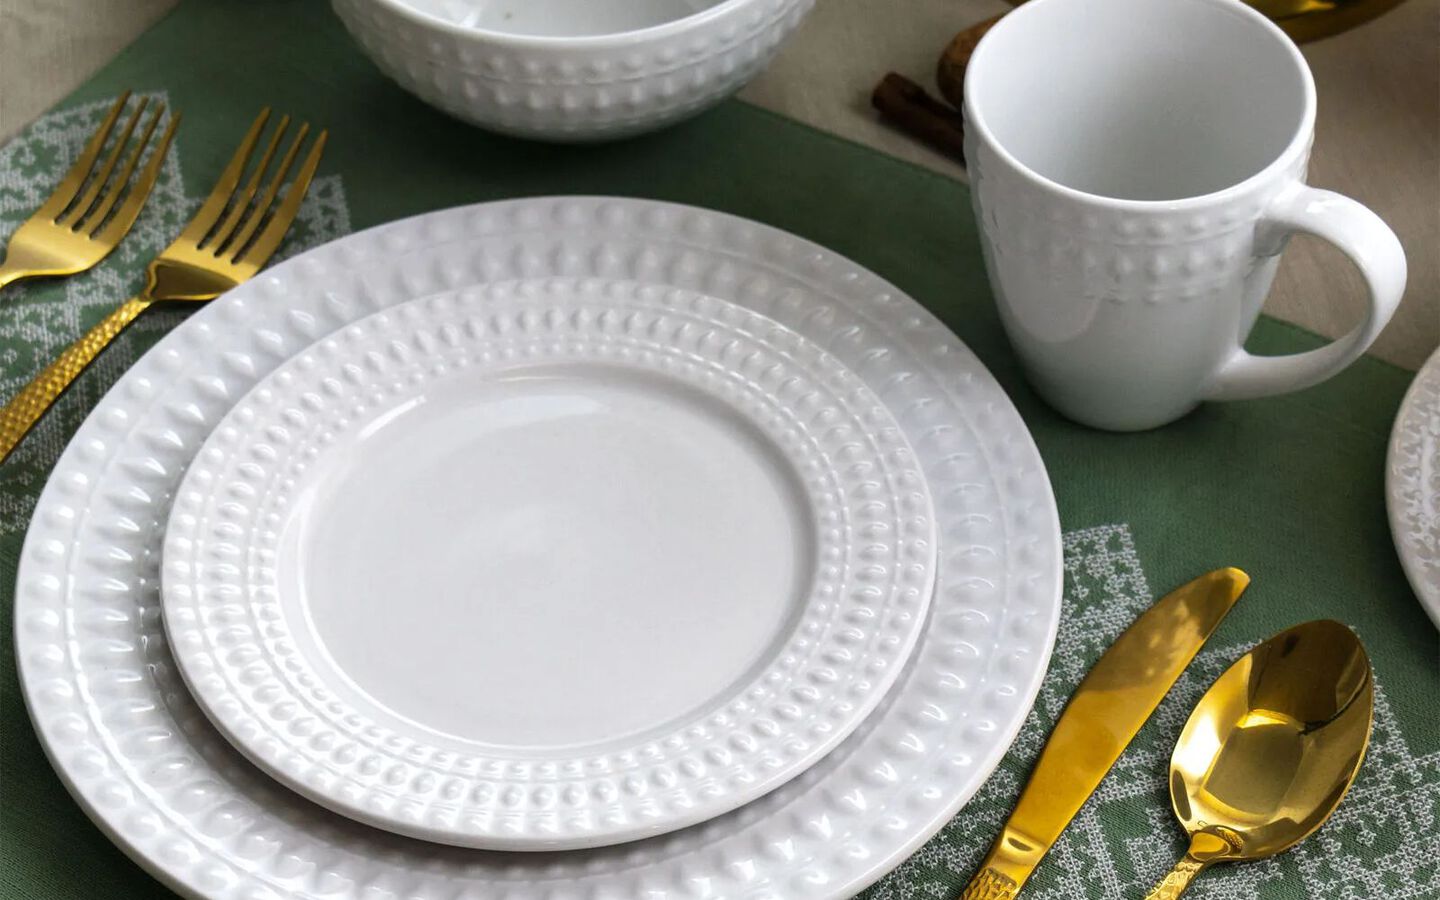 Closeup of white plate setting, matching cups, and gold silverware on a green placemat